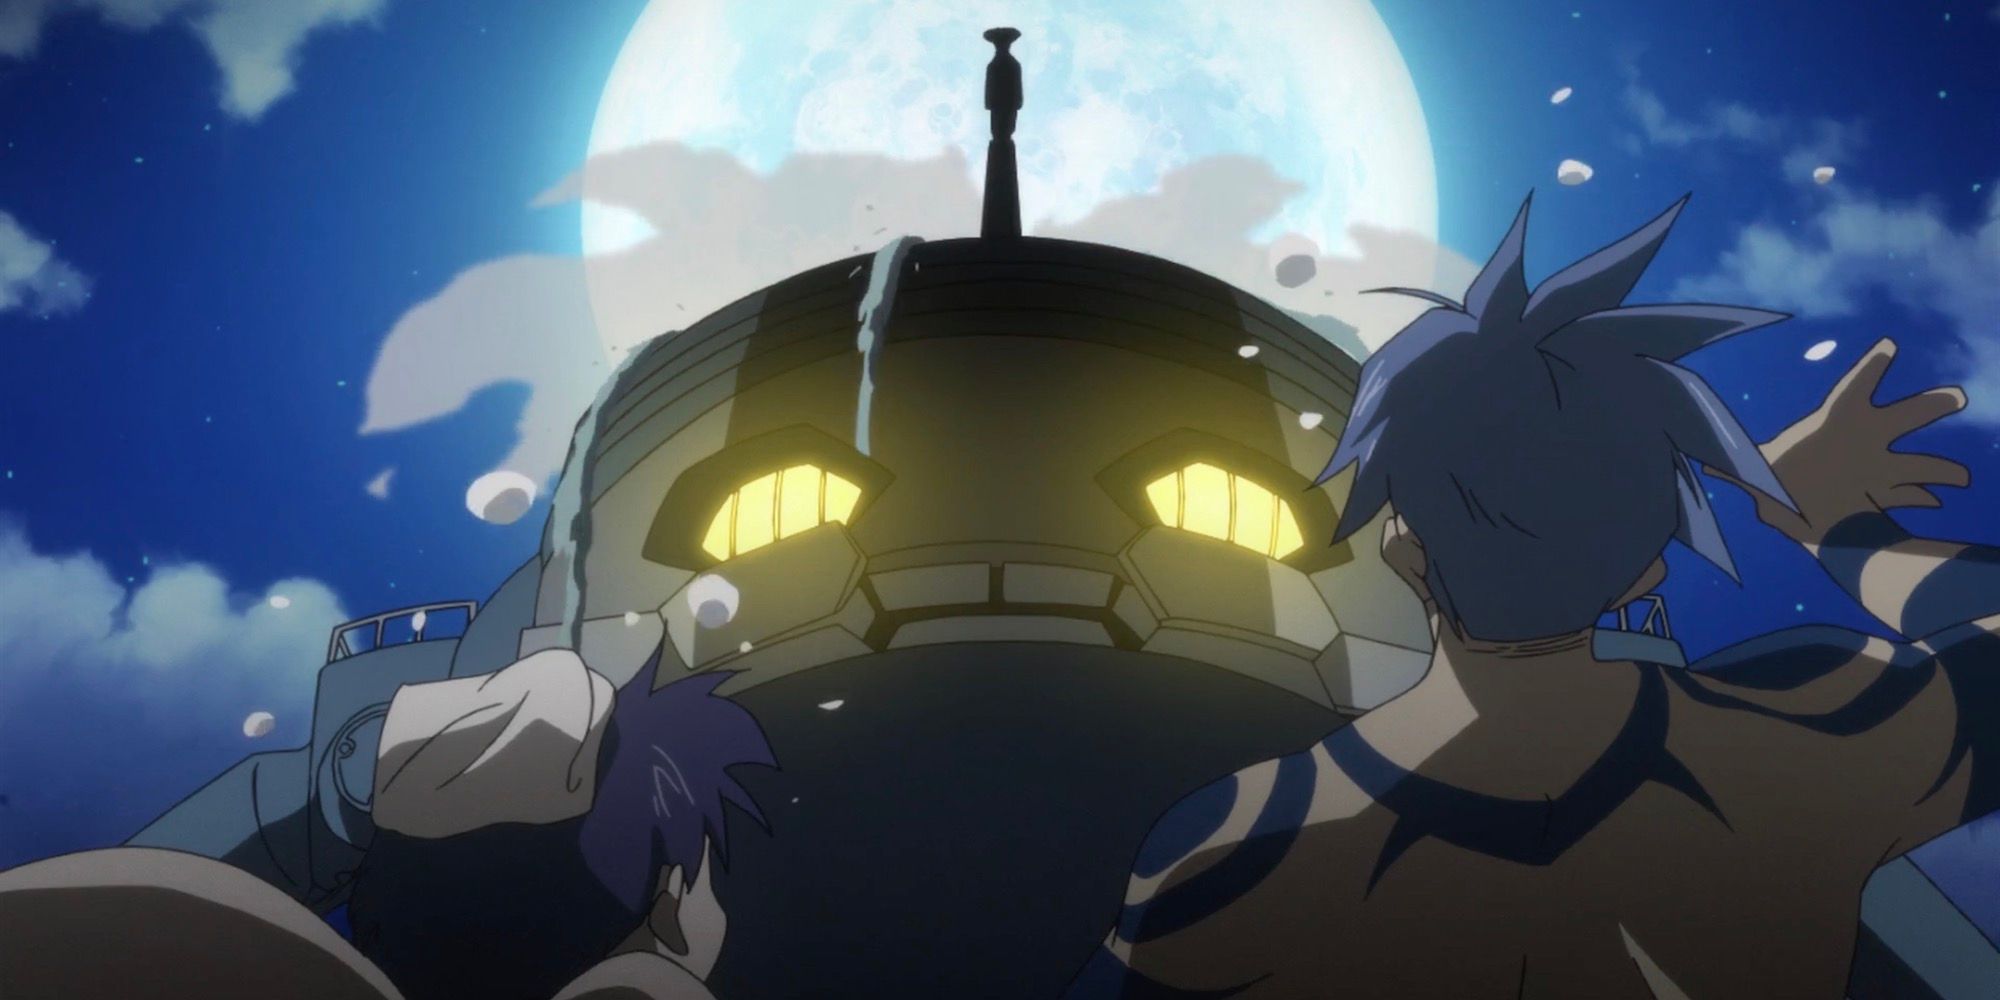 A scene featuring characters from Gurren Lagann 